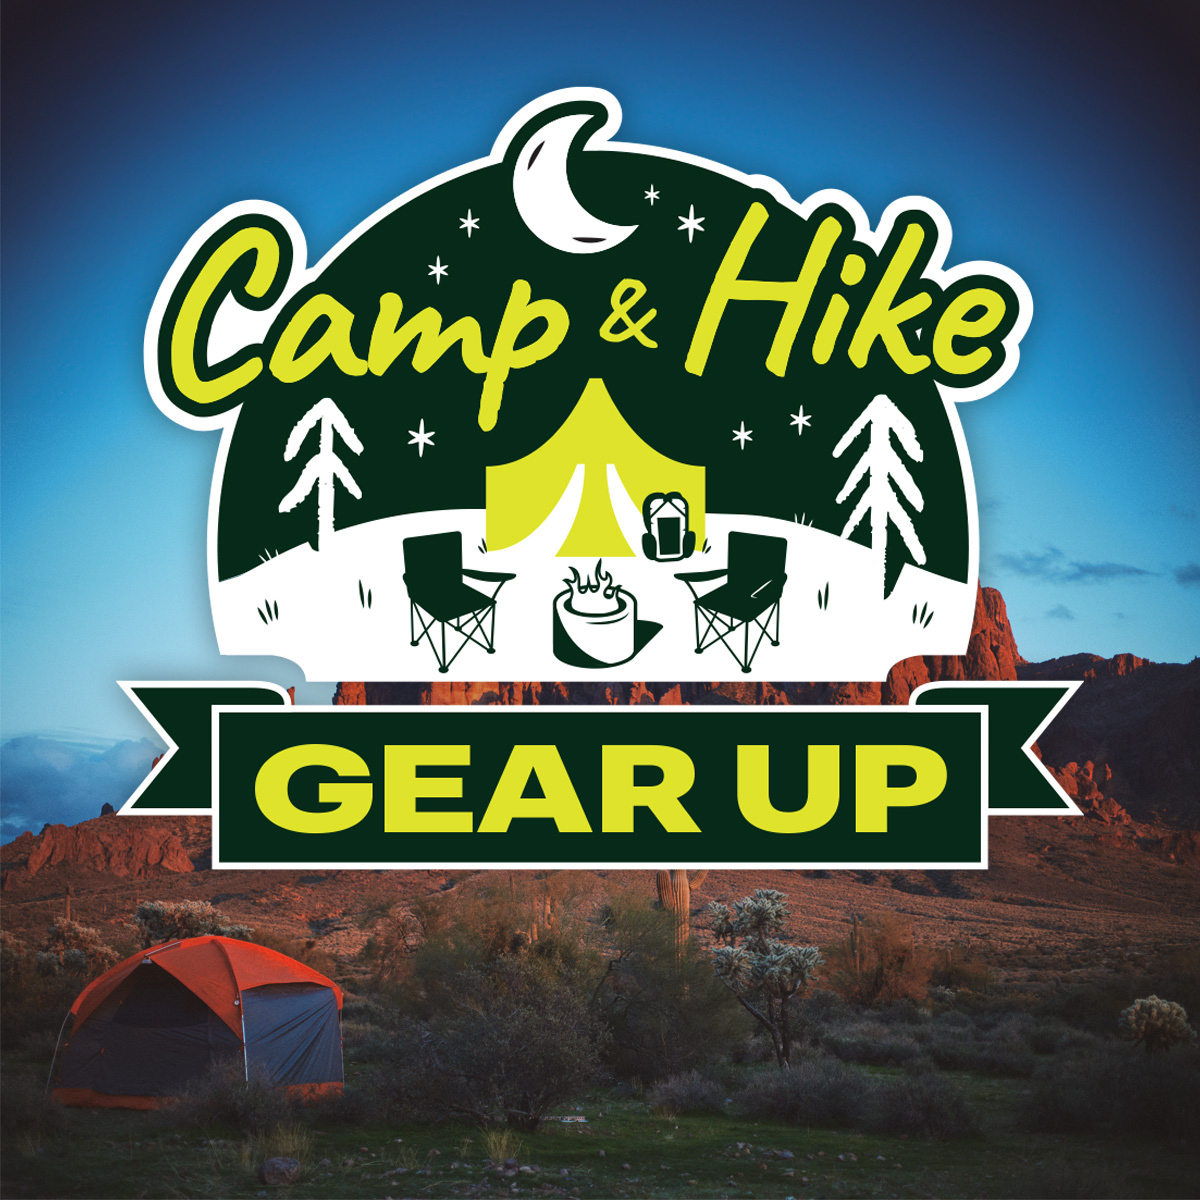  Camp and Hike Gear Up.